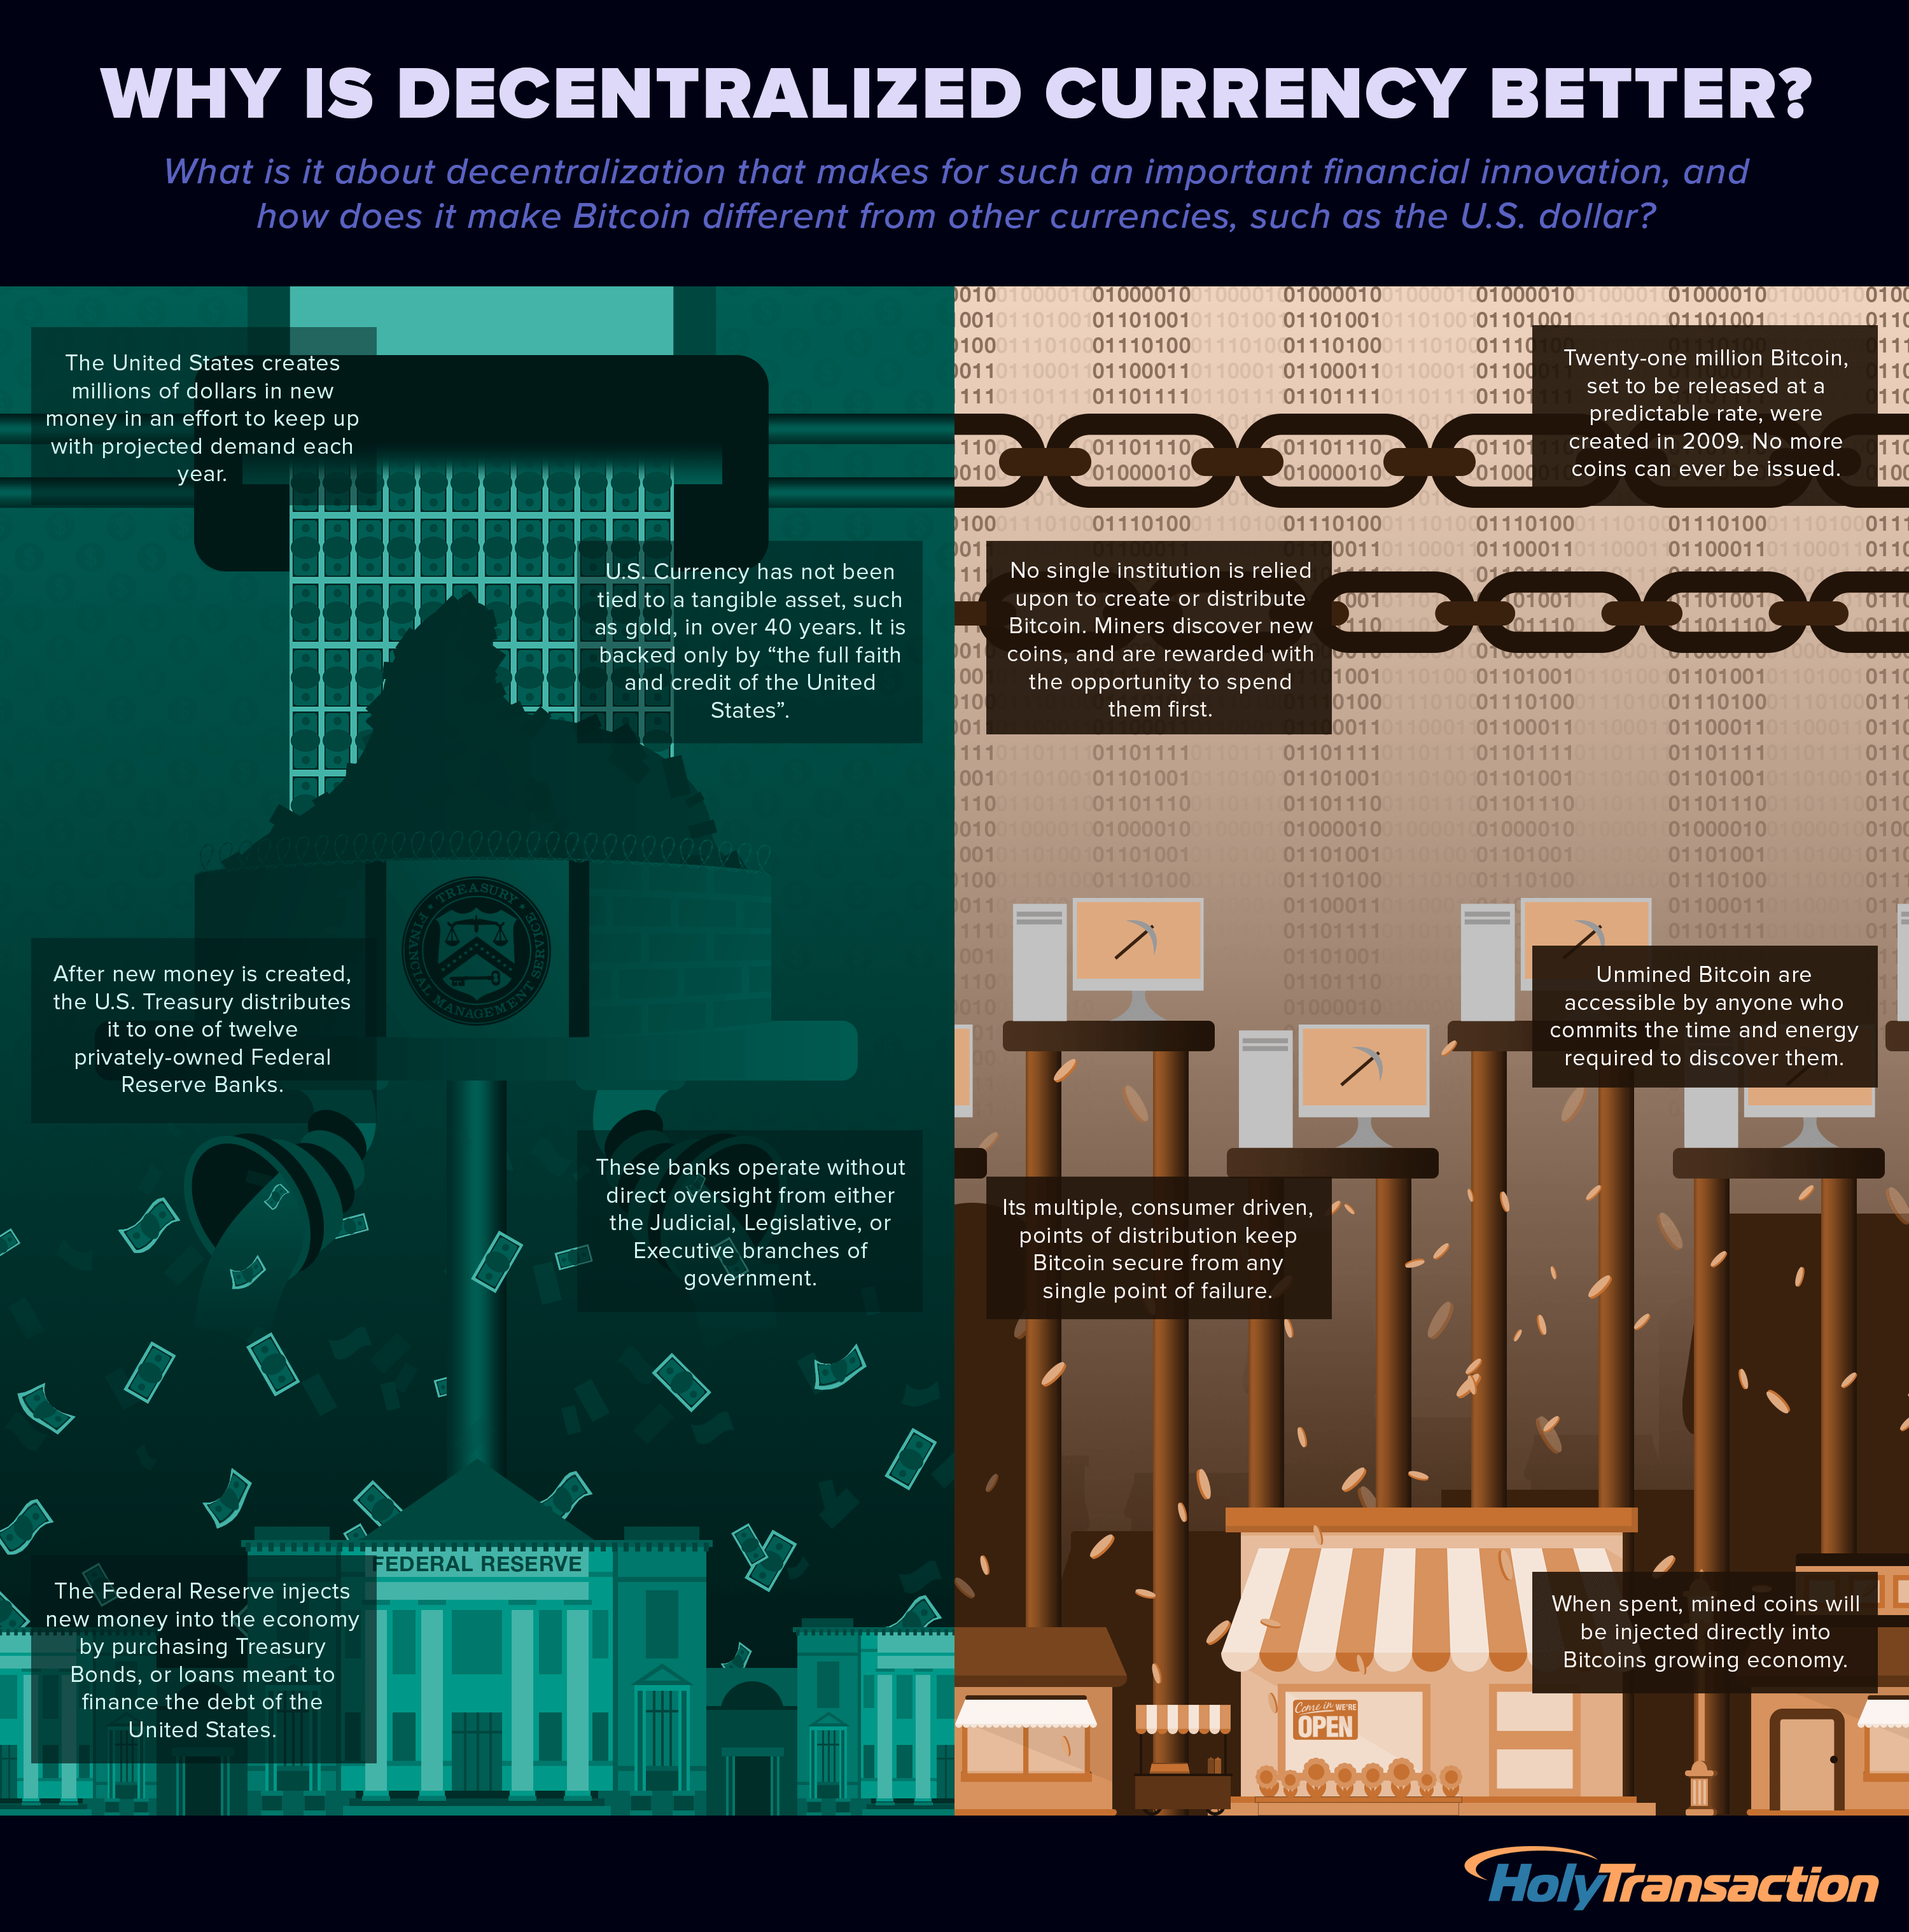 Why decentralized currency is better